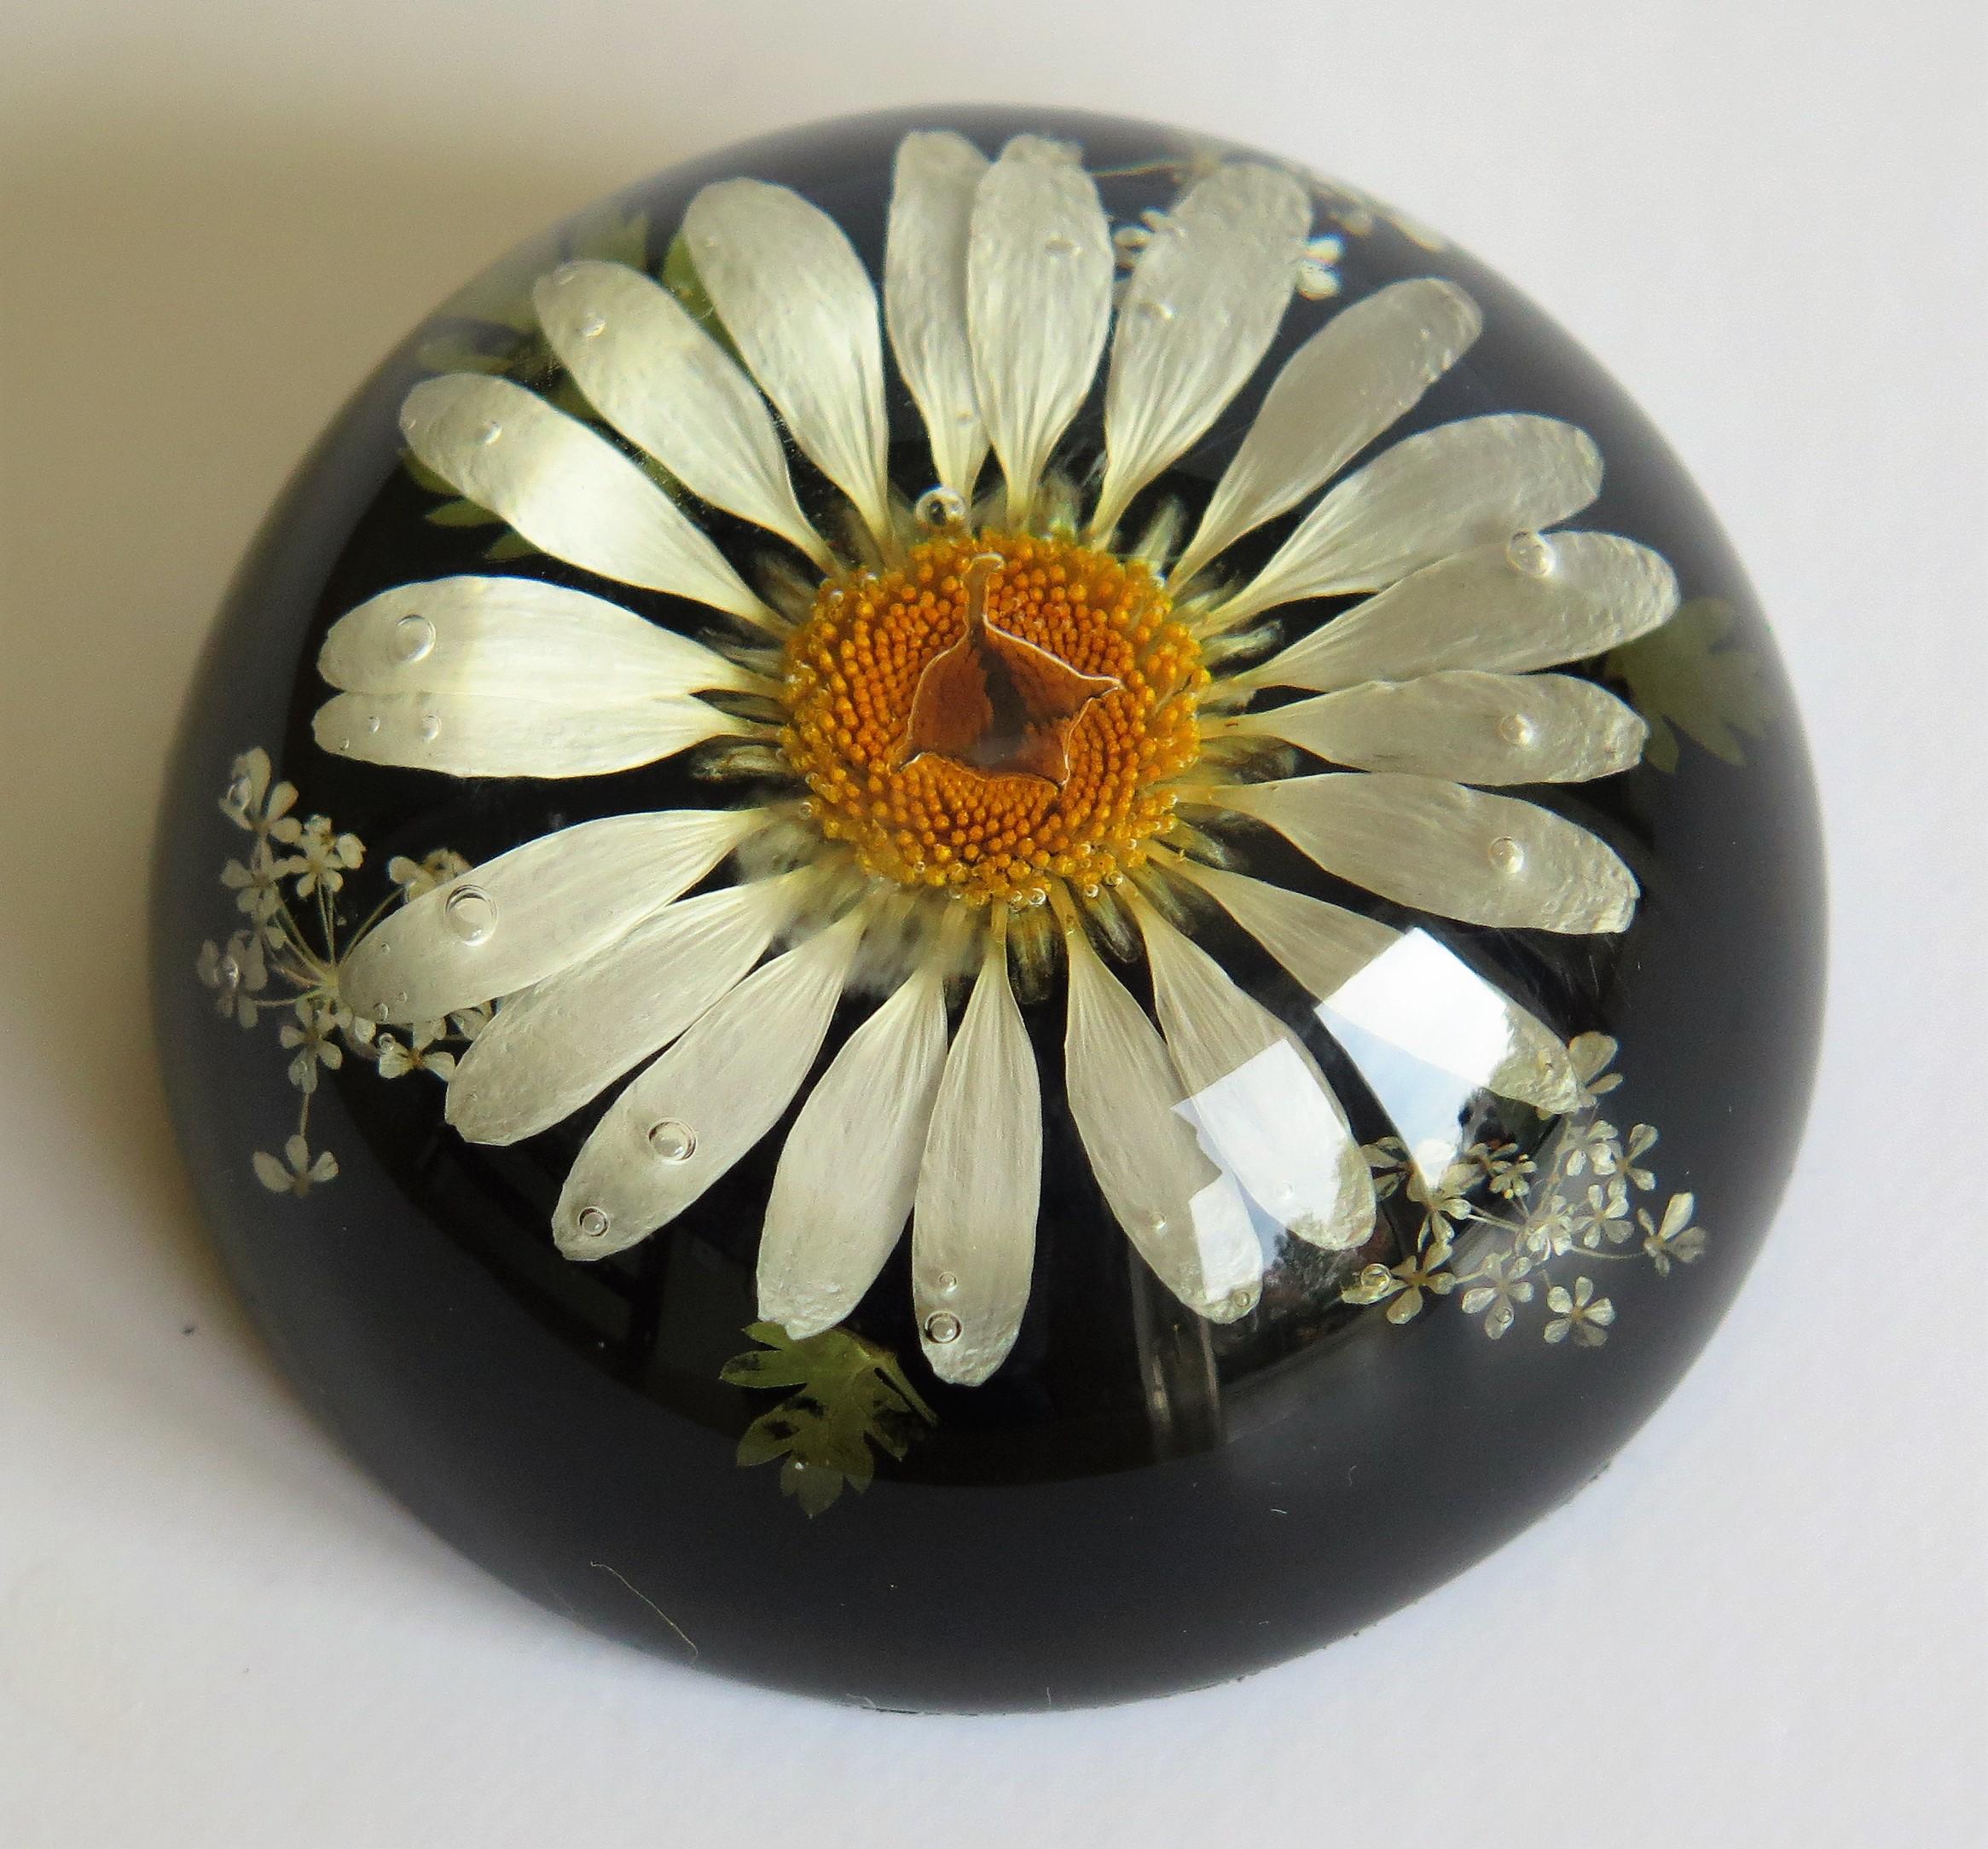 Daisy Paperweight Handmade with Real Flowers by Sarah Rogers, English 1